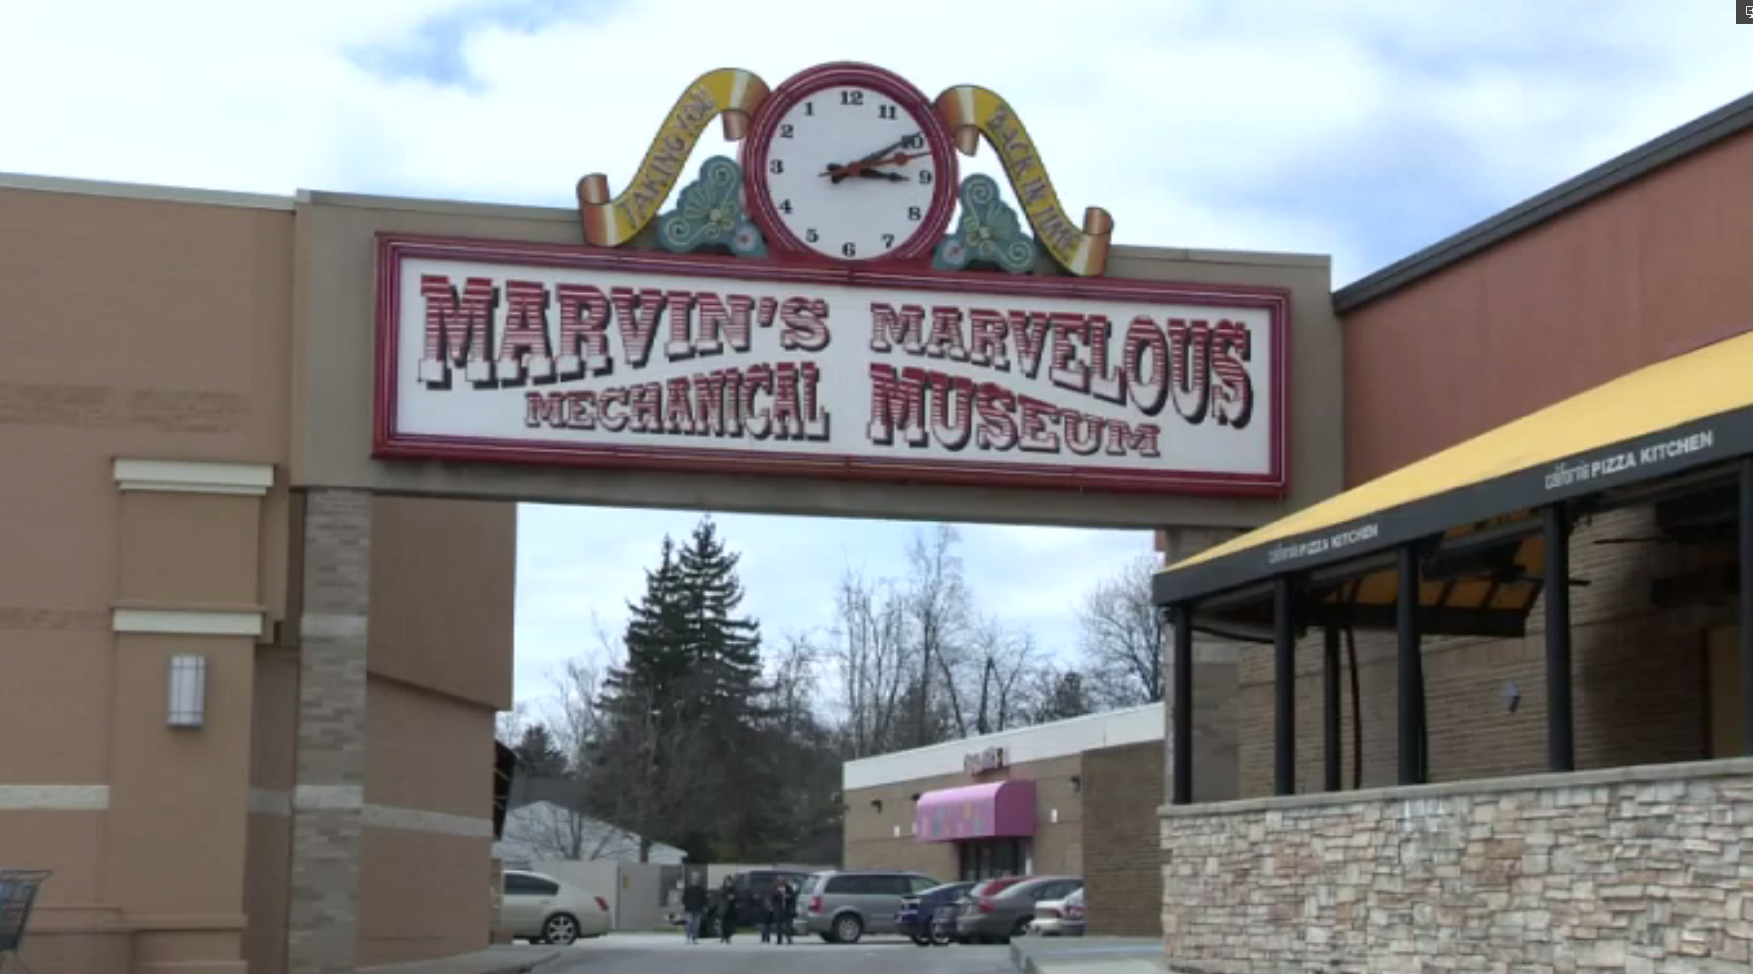 Community Rallies to Save Marvin's Mechanical Museum, Community